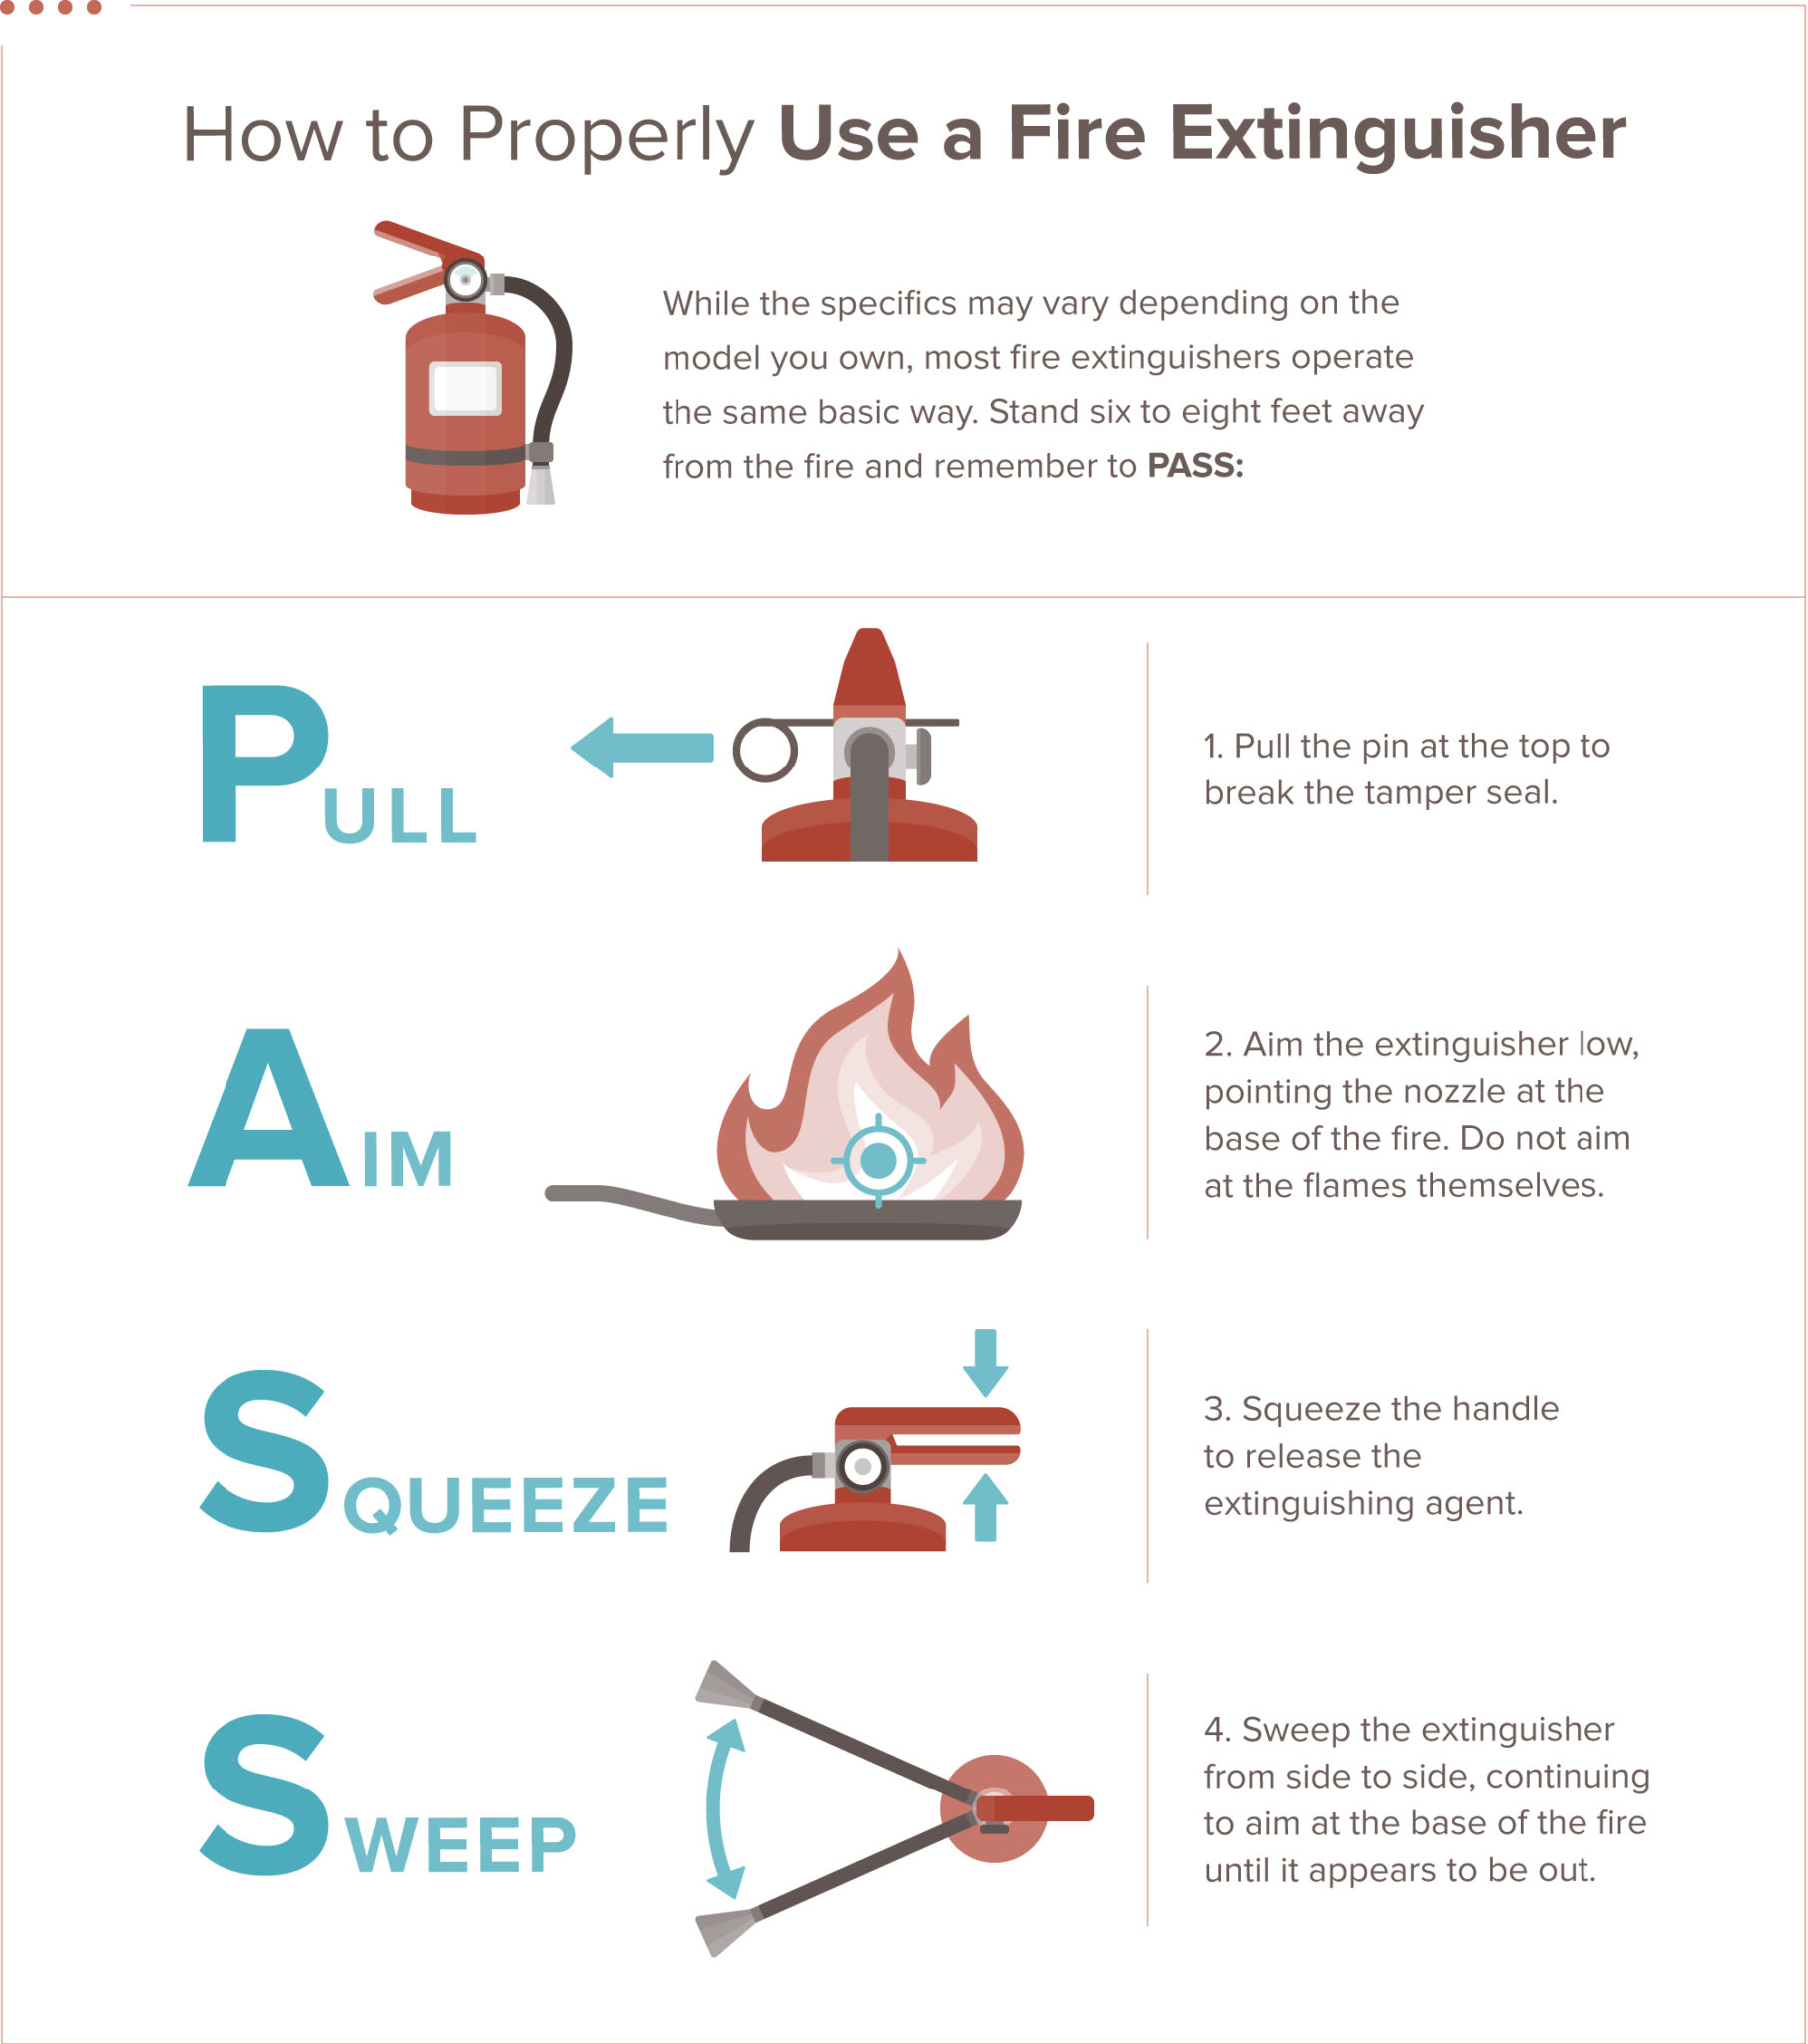 Be Prepared: How to Properly Use a Fire Extinguisher - Bill Frederickson